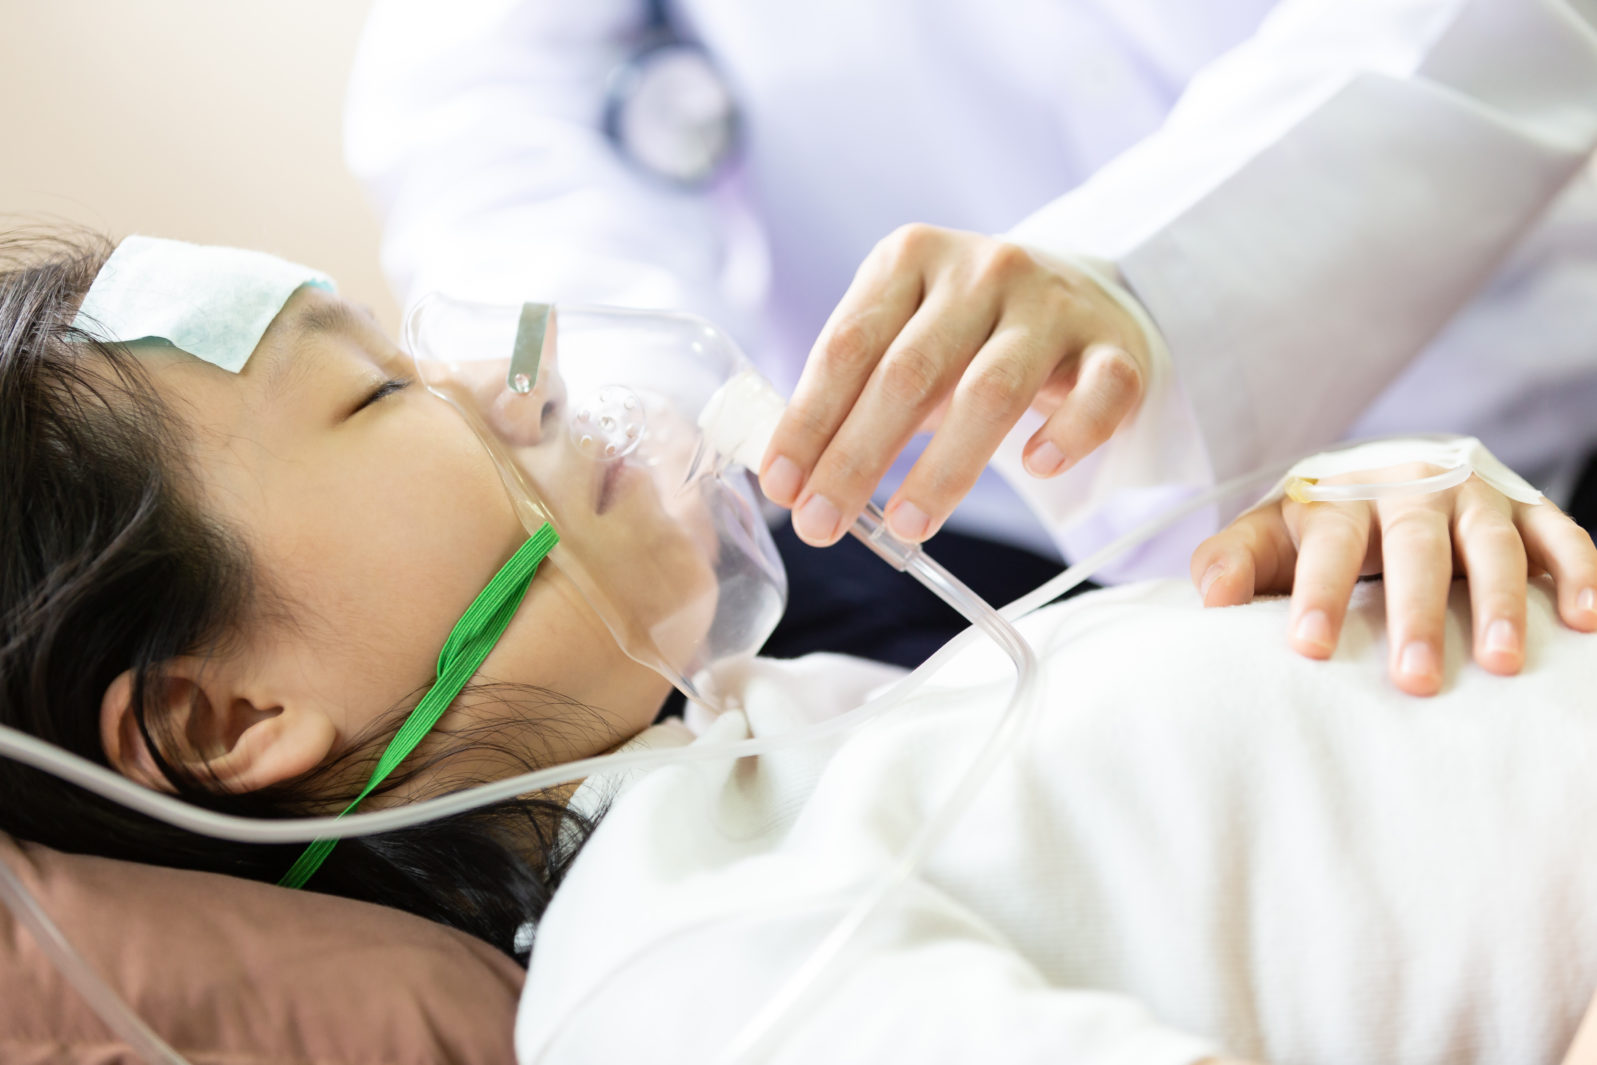 Closeup of hand female caregiver holding oxygen mask with cute child patient in hospital bed or home,little girl putting inhalation,doctor or nurse intensive care,health care,support,help concept